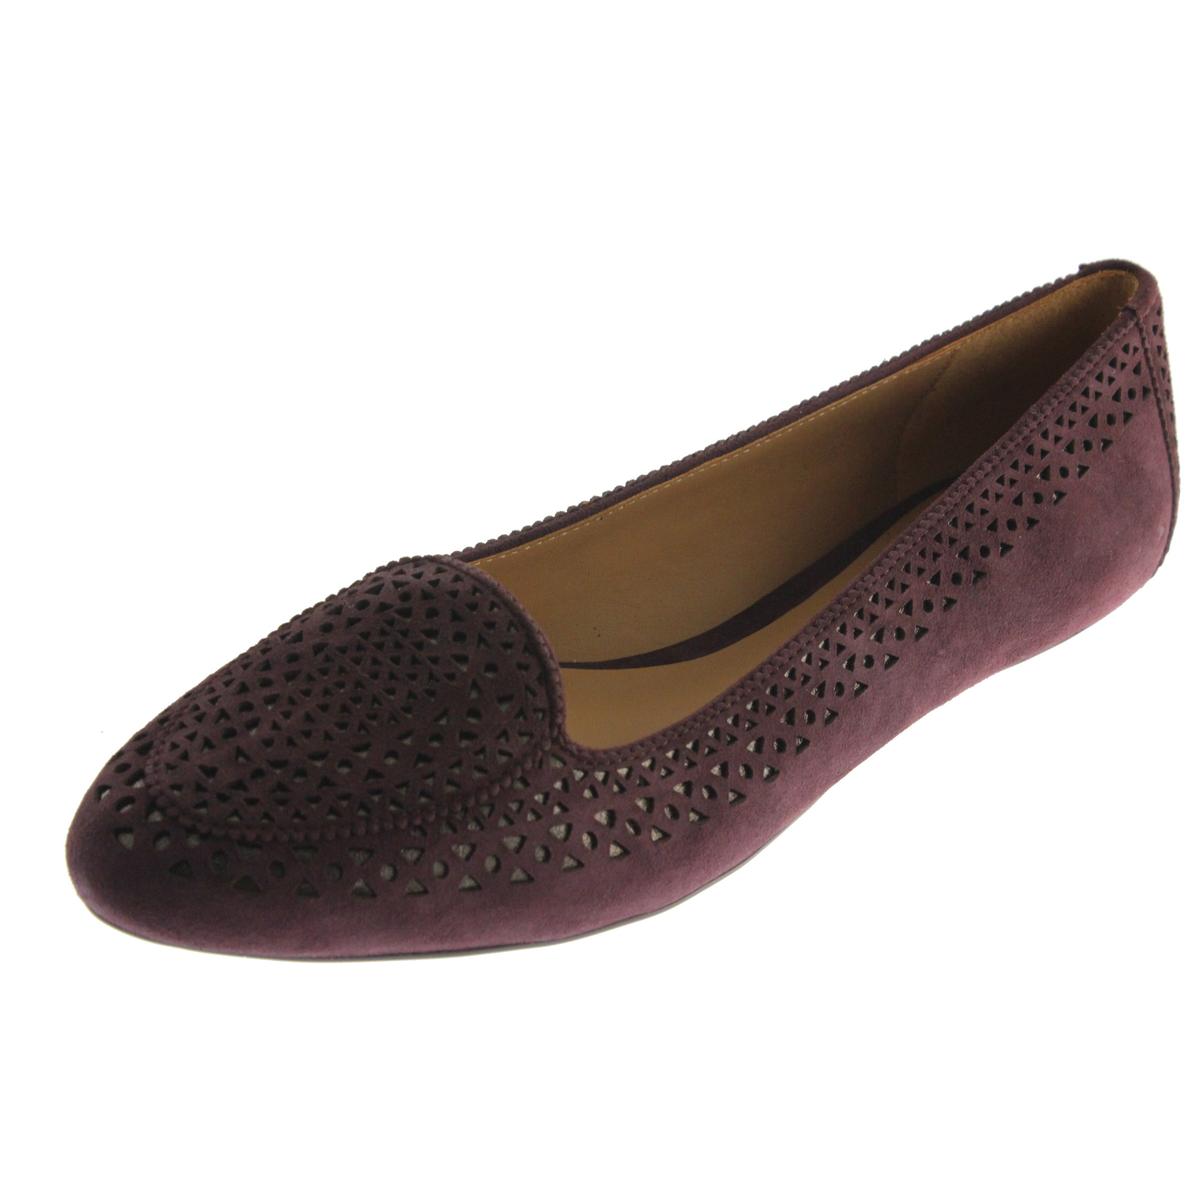 Aerin 3159 Womens Gledstone Suede Slip On Perforated Loafers Shoes BHFO